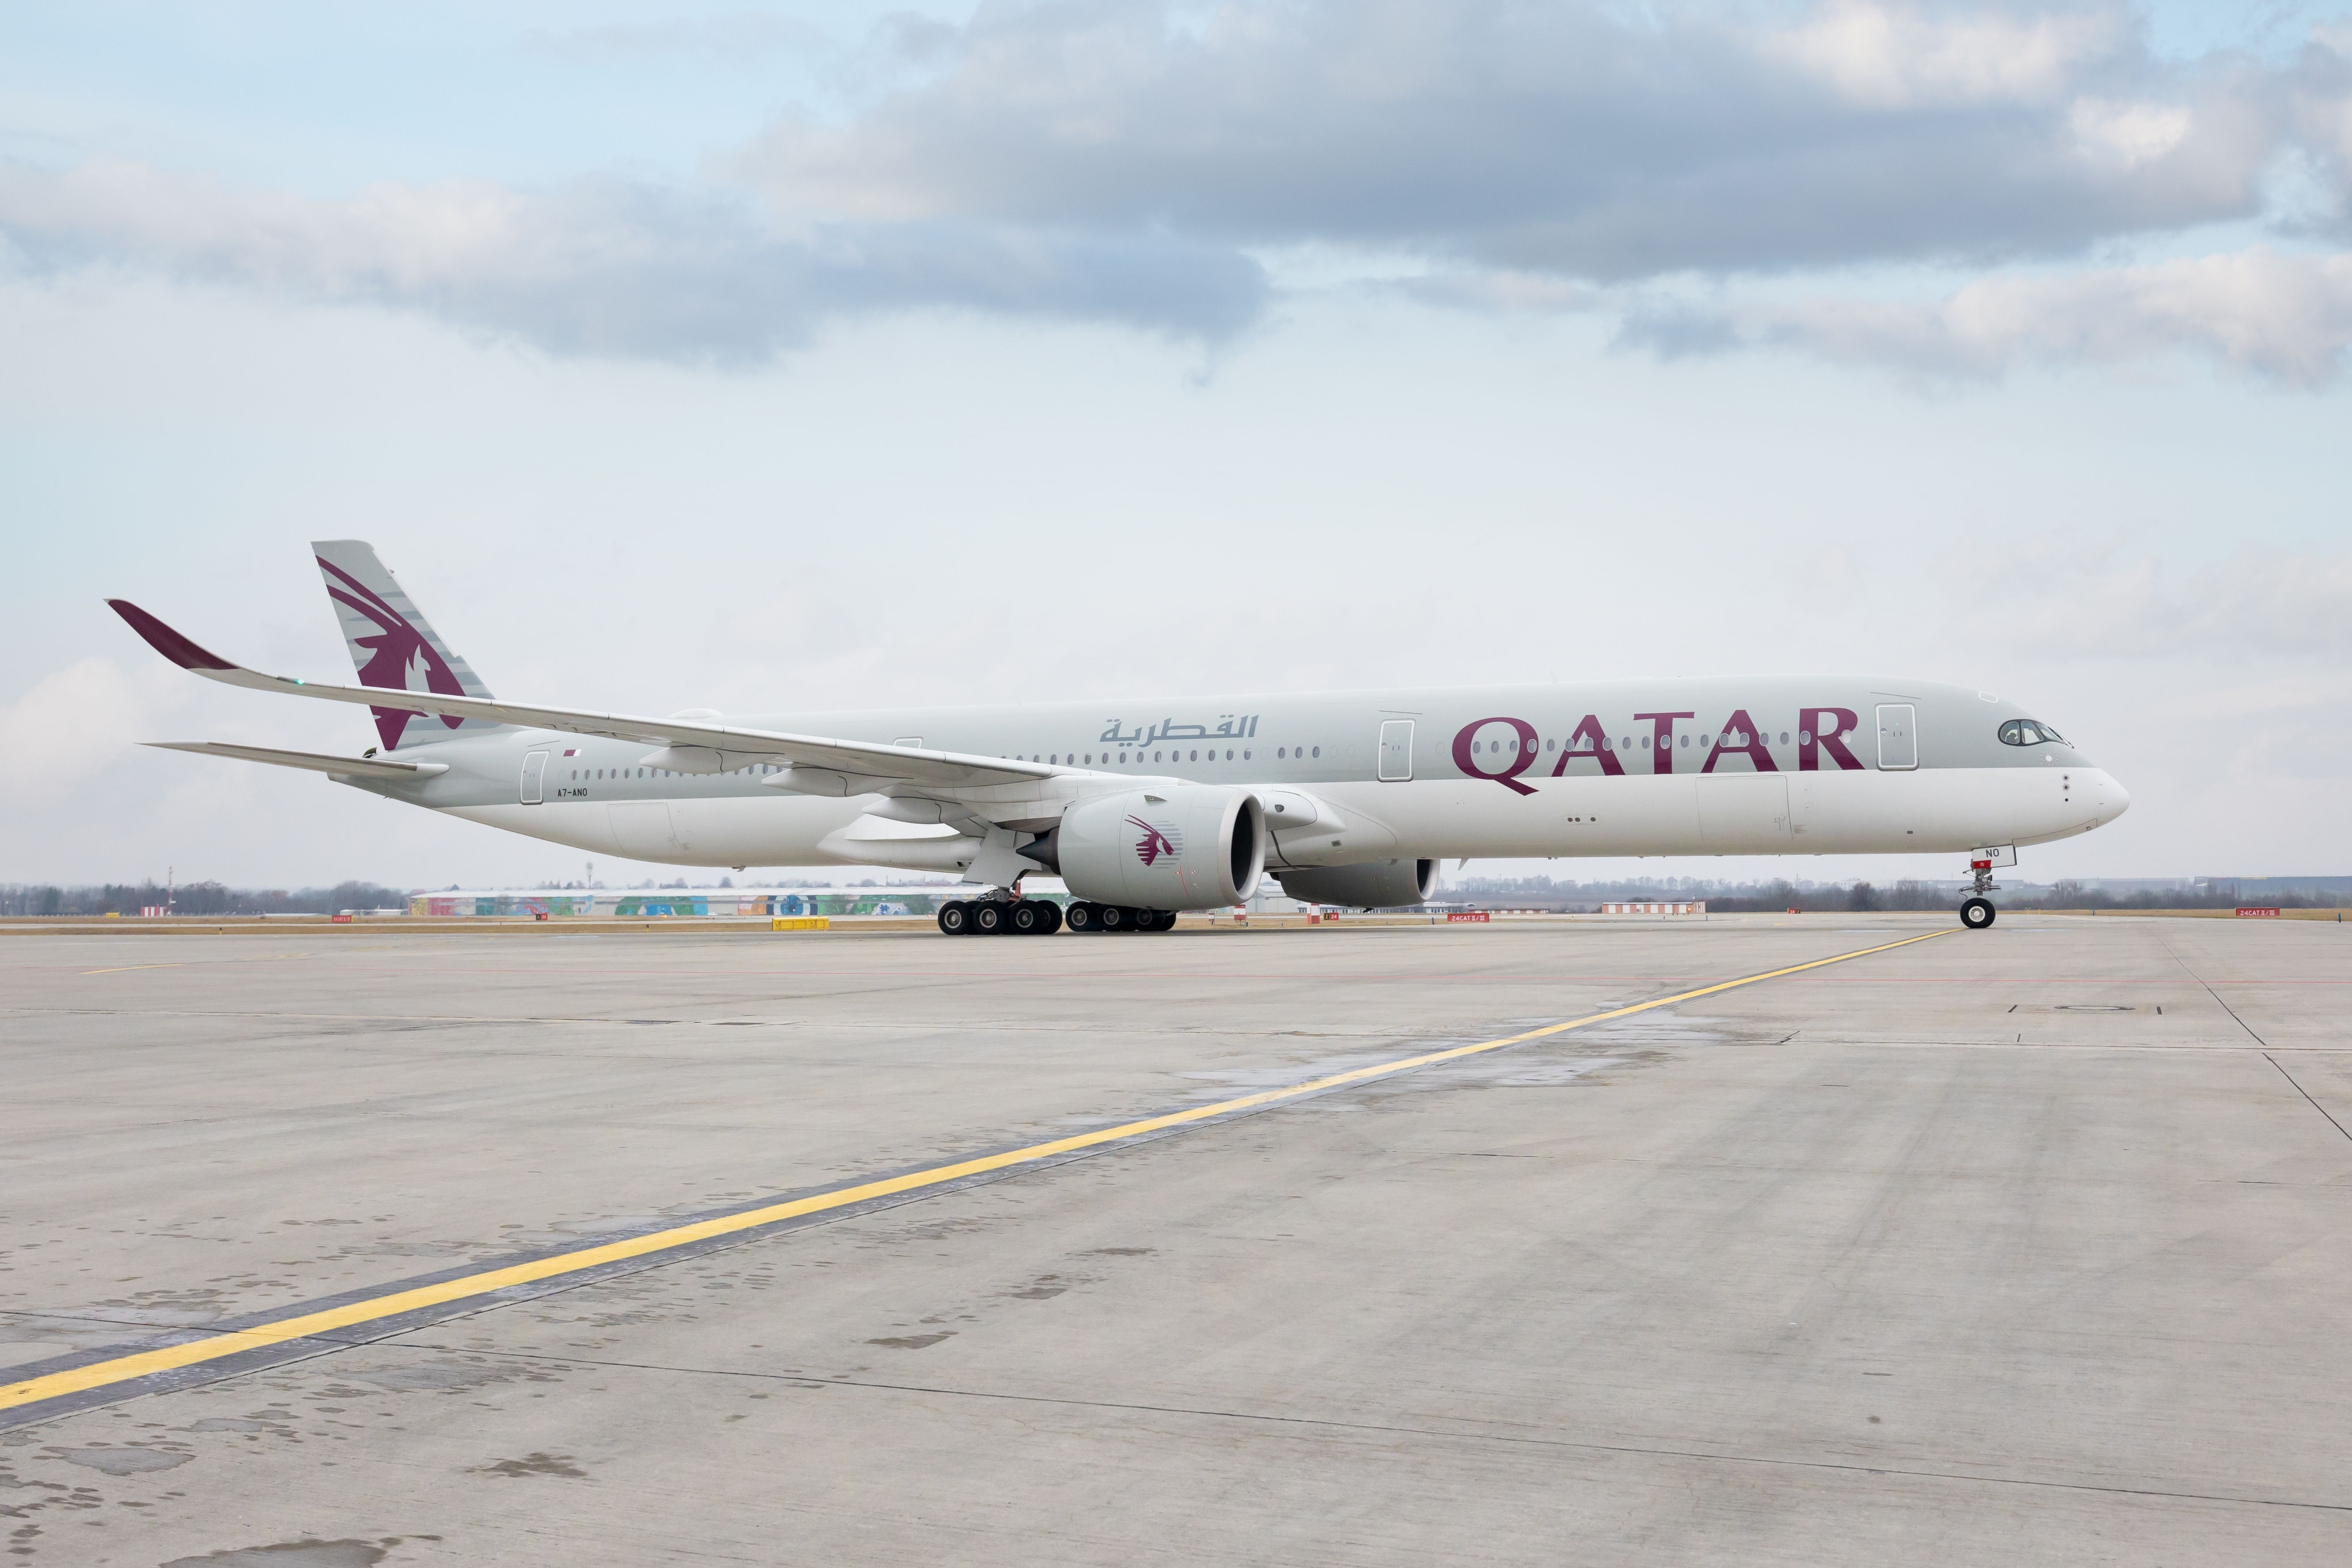 Qatar Airbus A350 on the ground